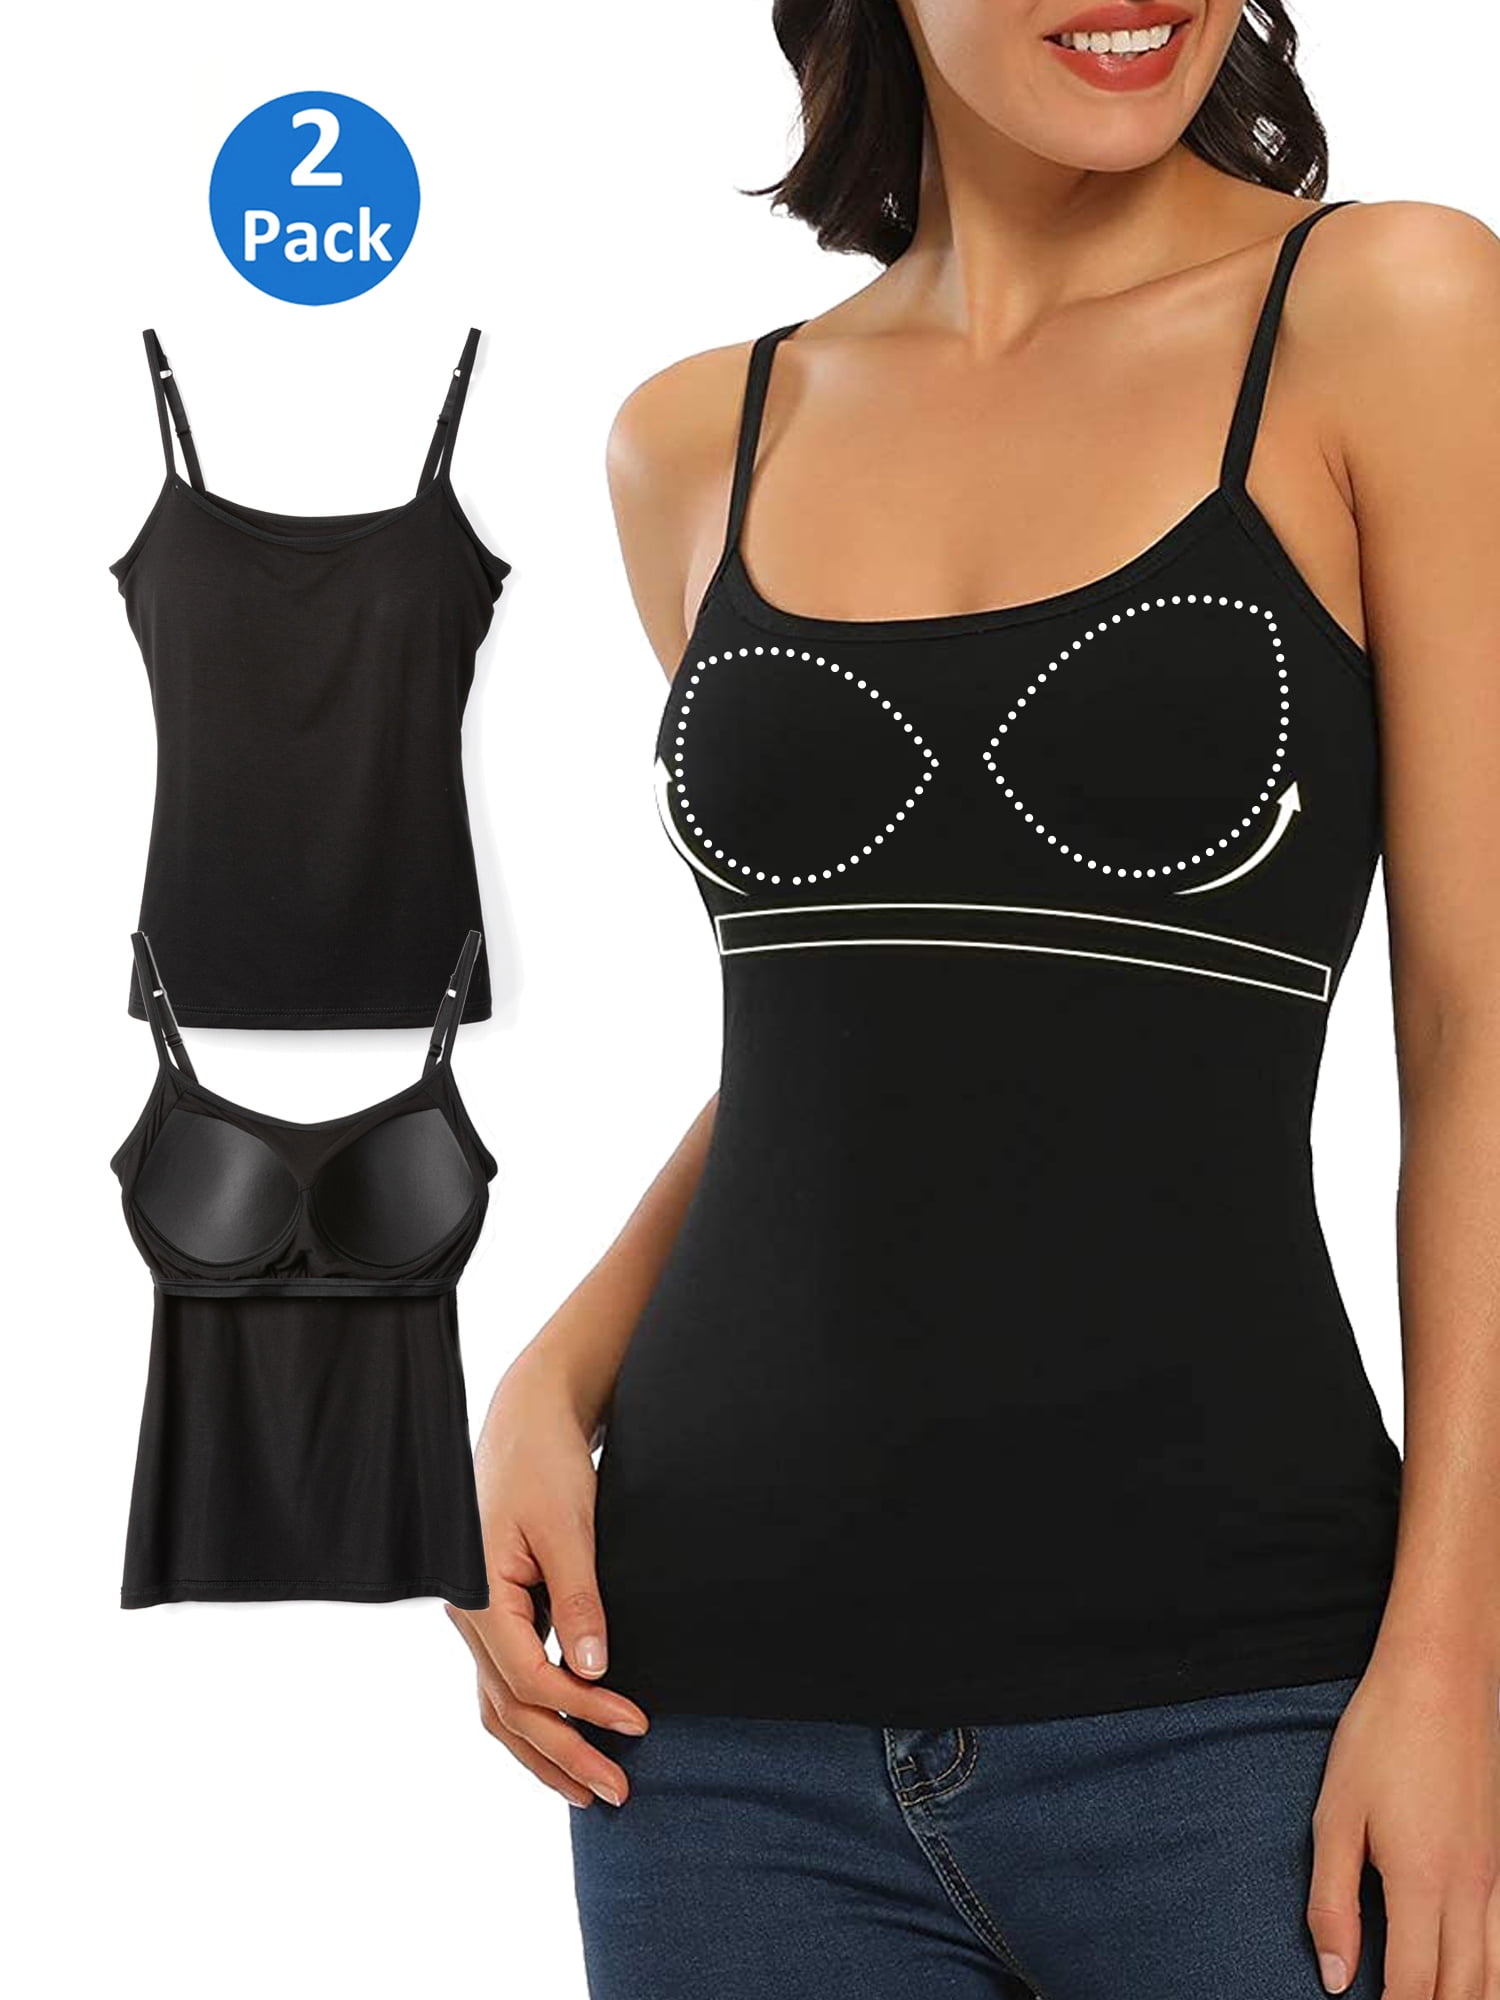 FeelinGirl Camisoles with Built in Bra Compression Tank Tops for